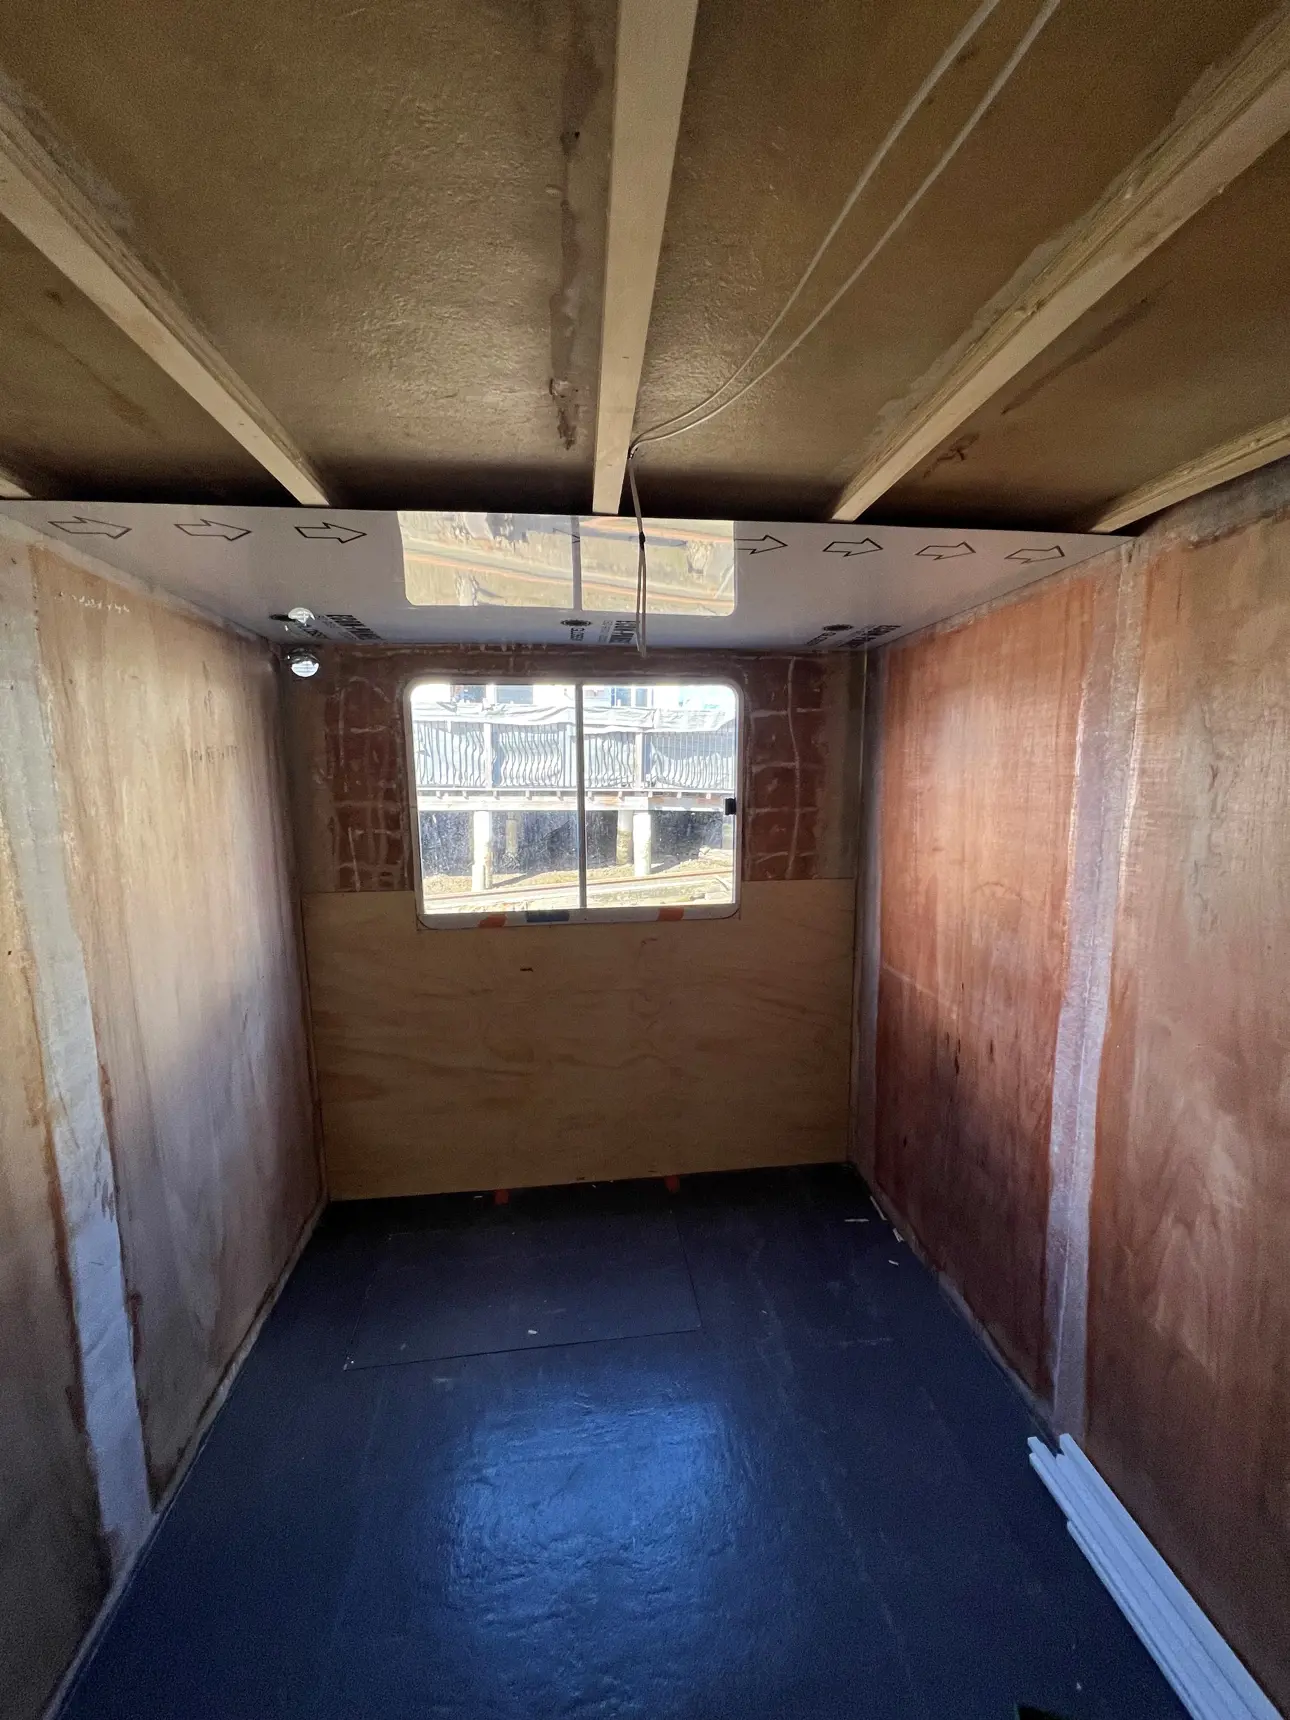 01 September - internal cladding goes up in one of the bedrooms